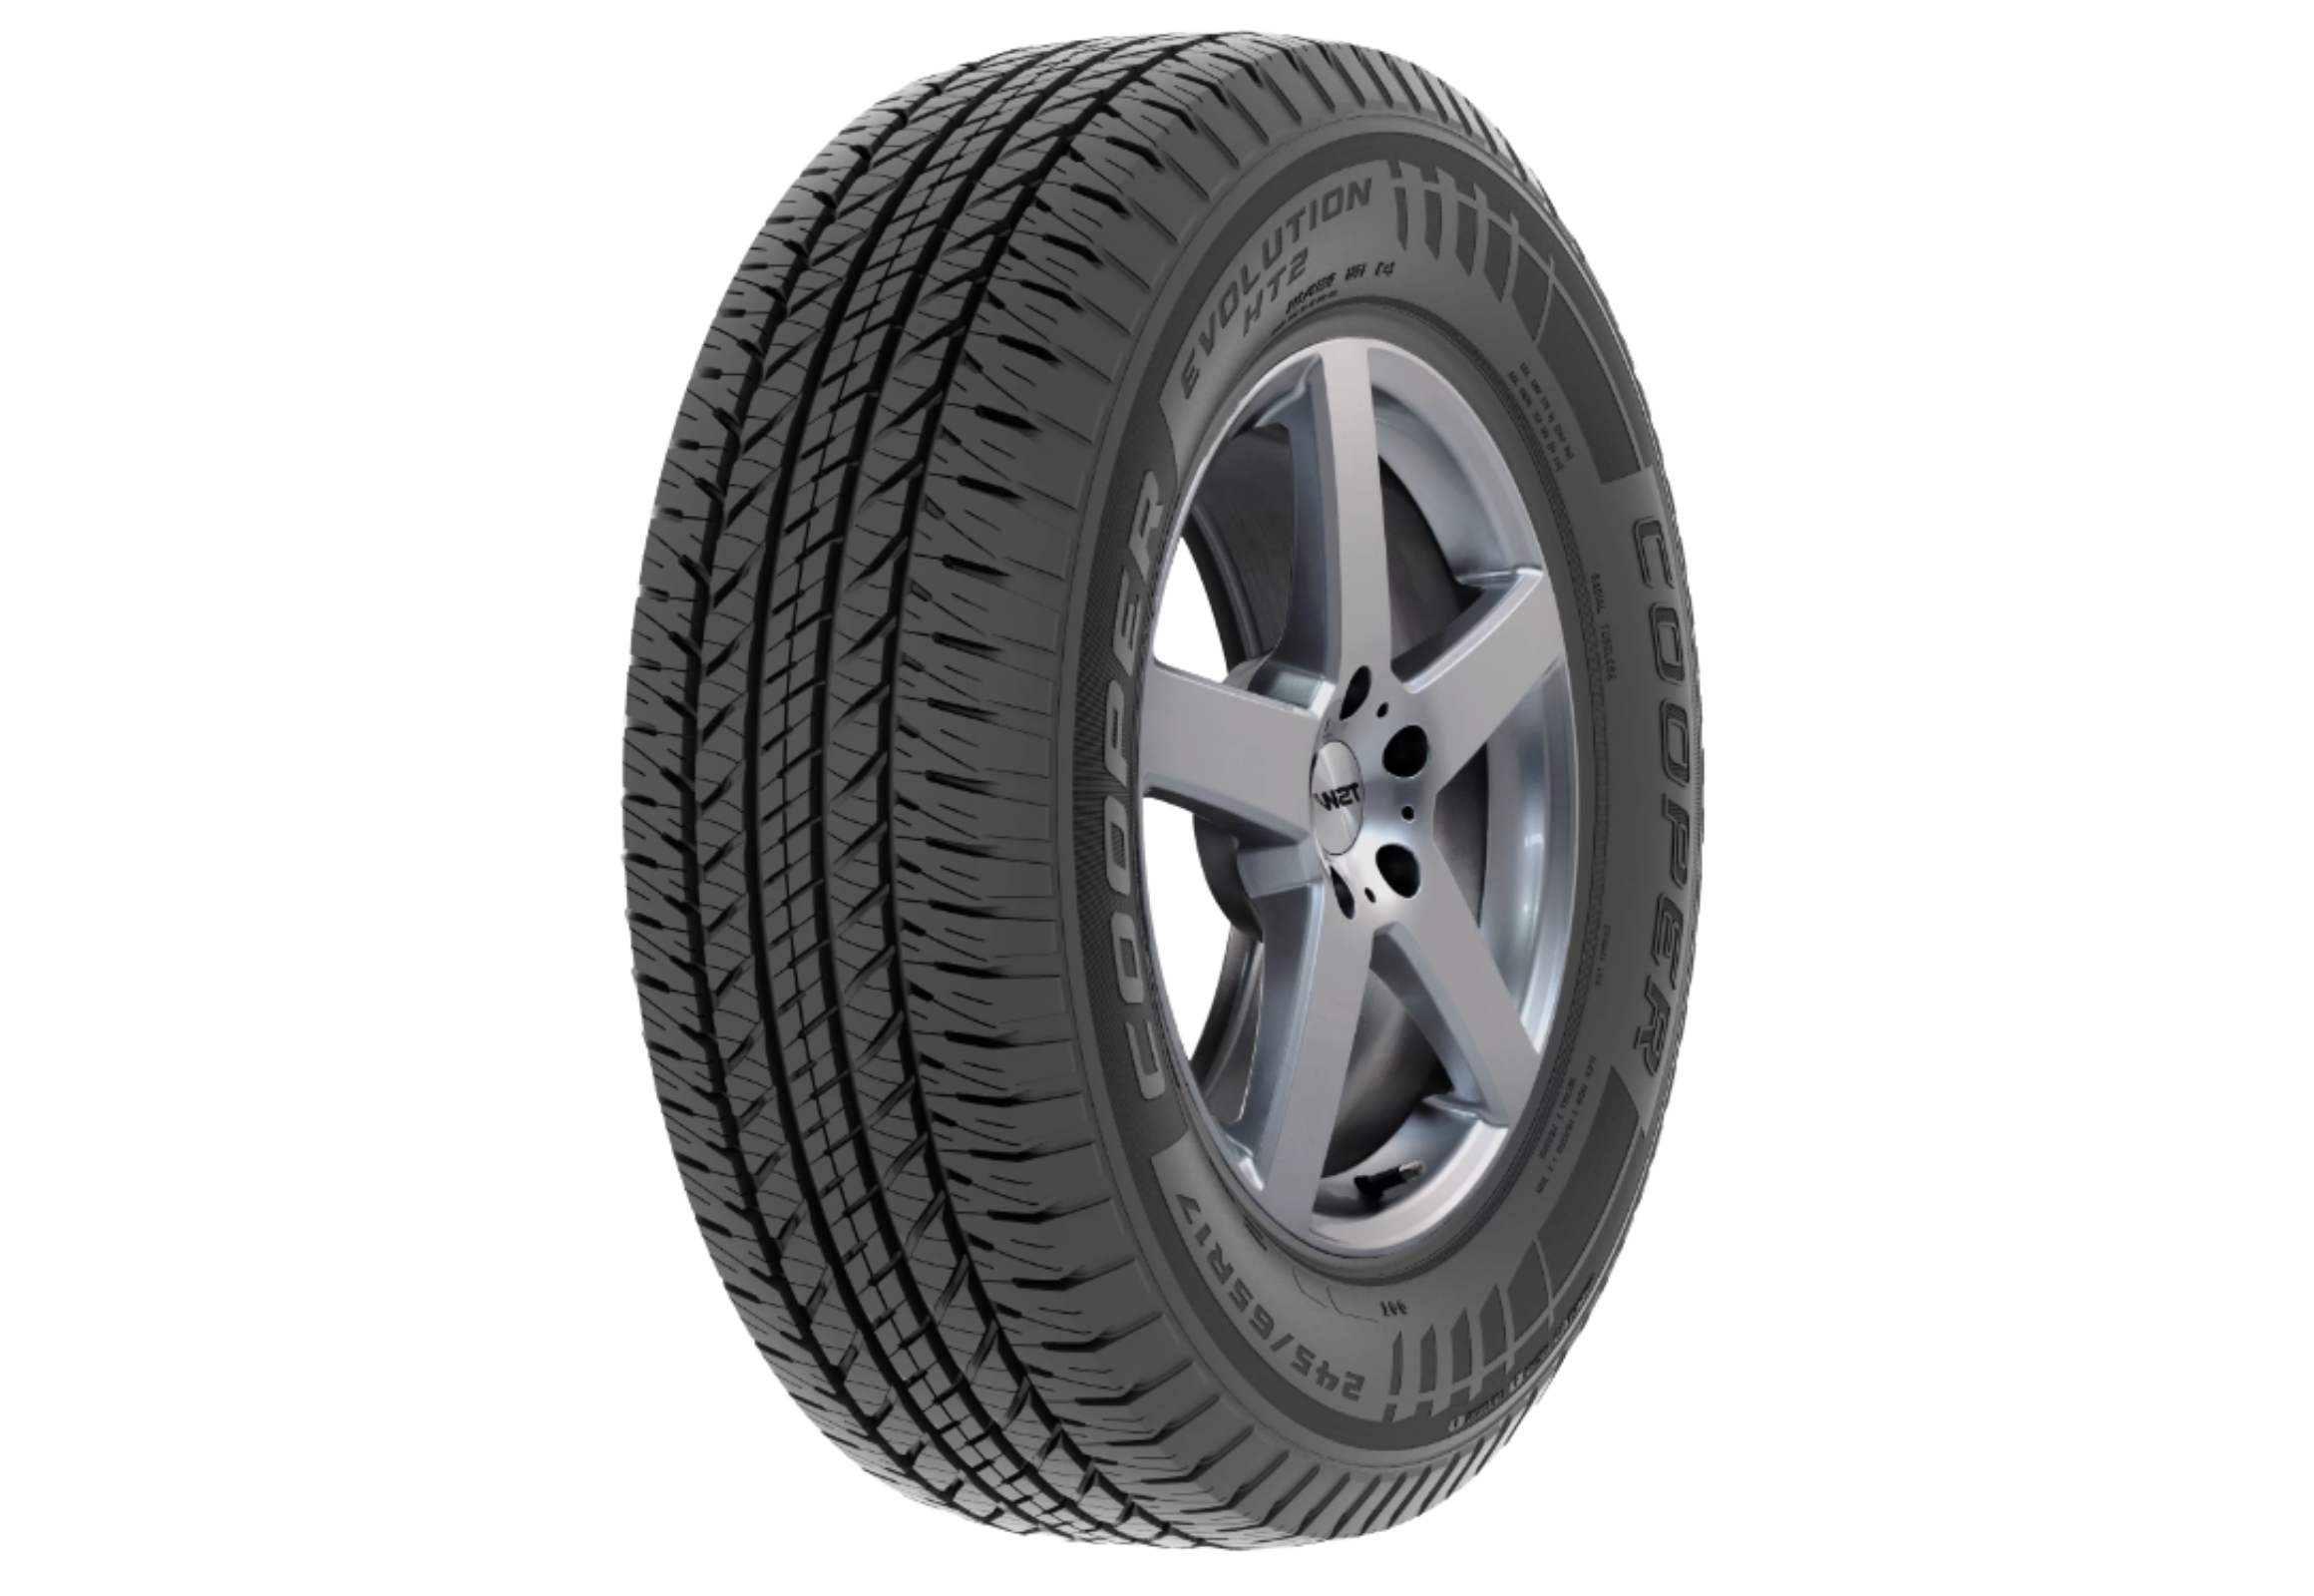 Epic Tire Sale: Goodyear, Cooper, and More at Walmart - The Krazy Coupon  Lady